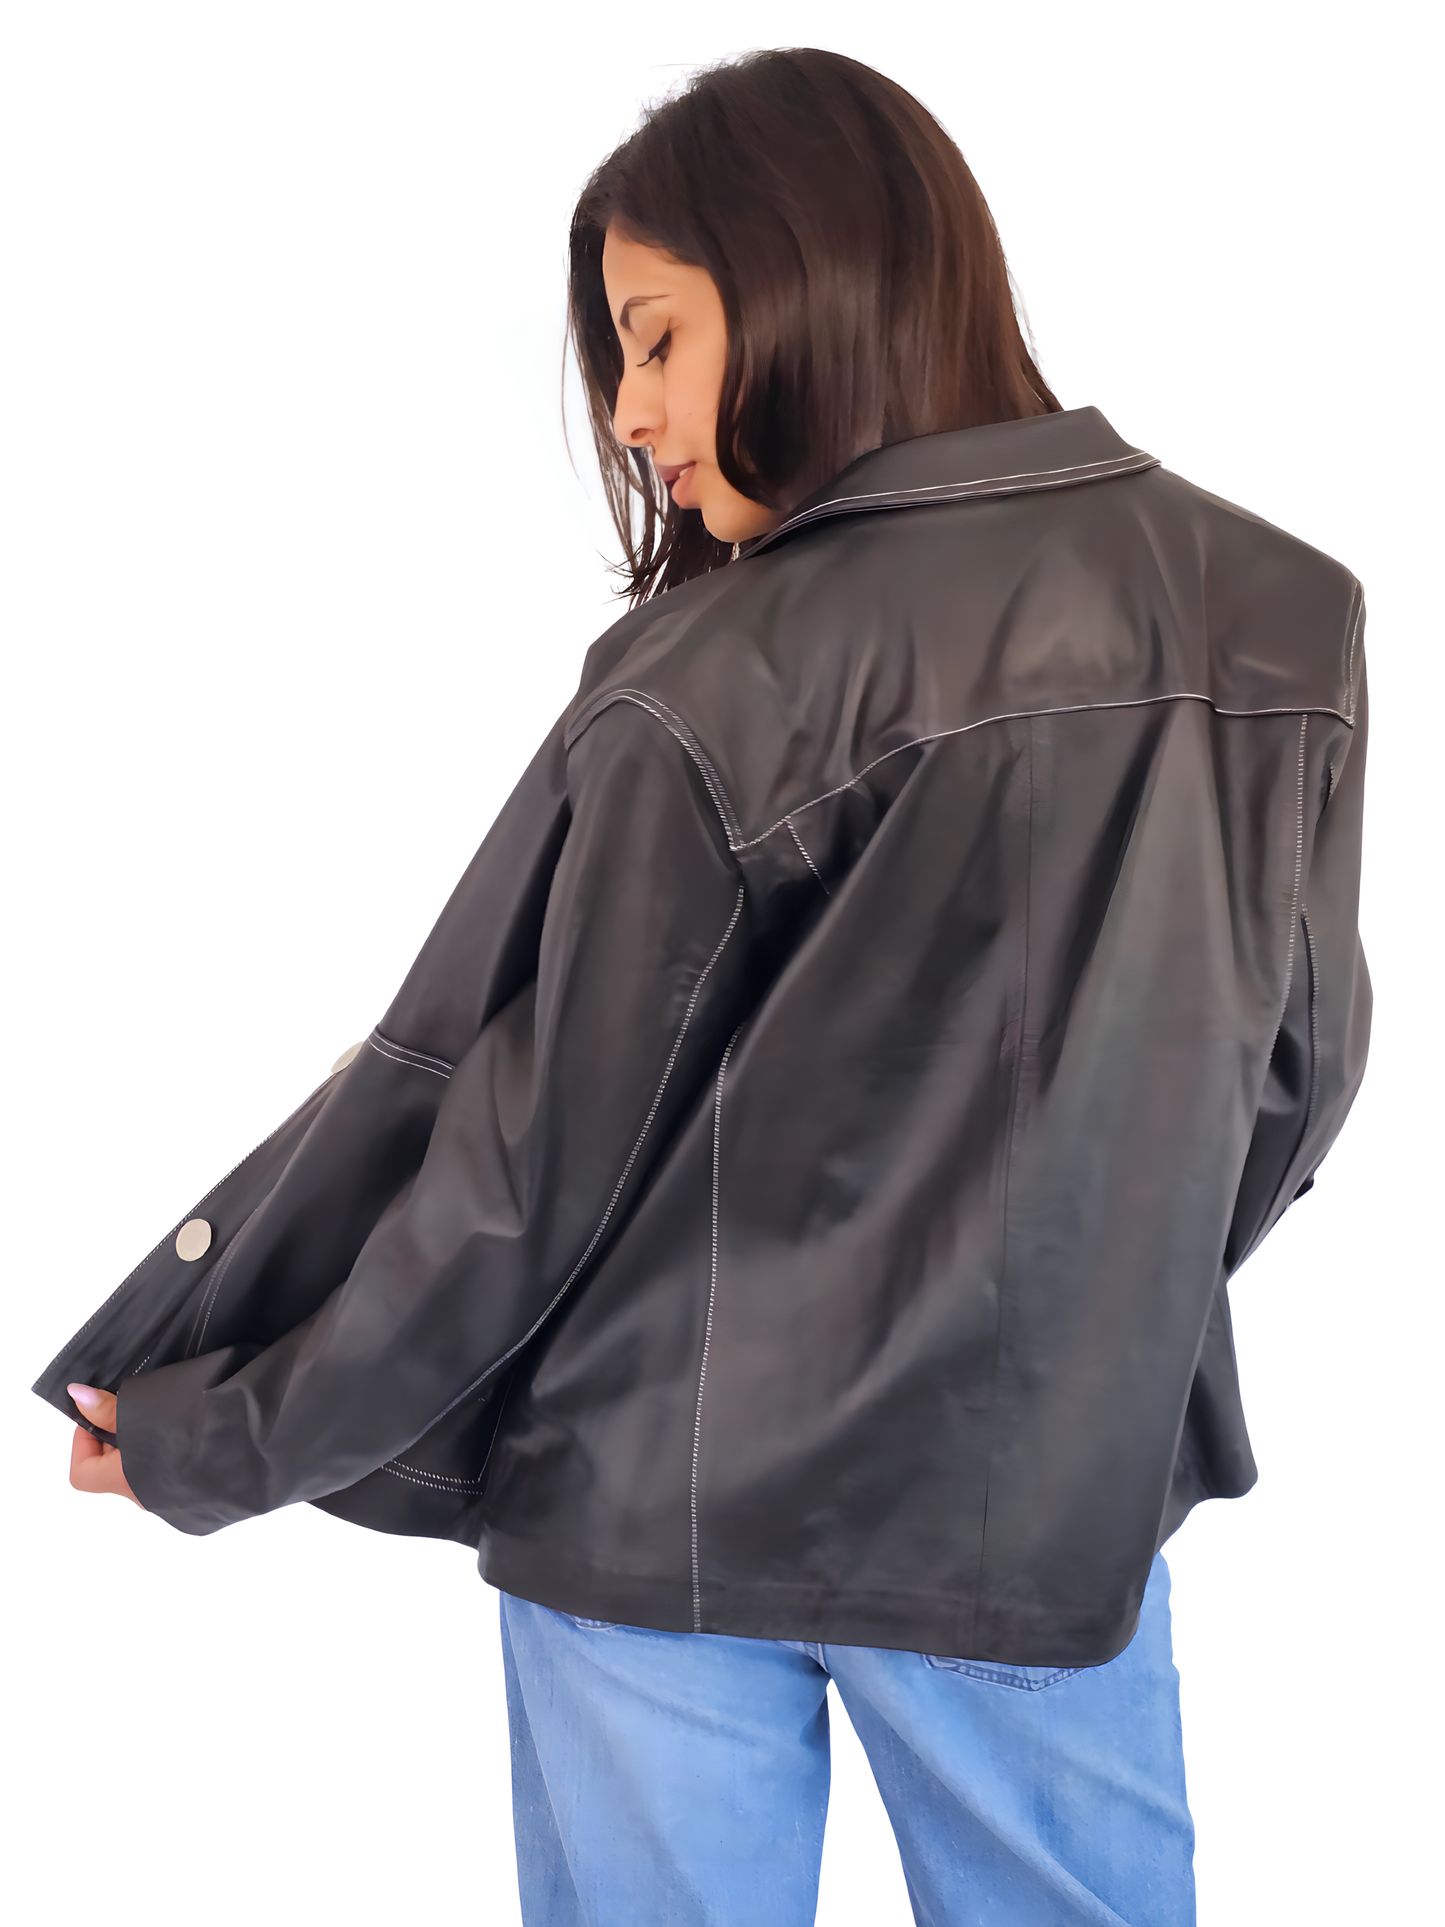 Oversized Hand Crafted Leather Jacket Tosai